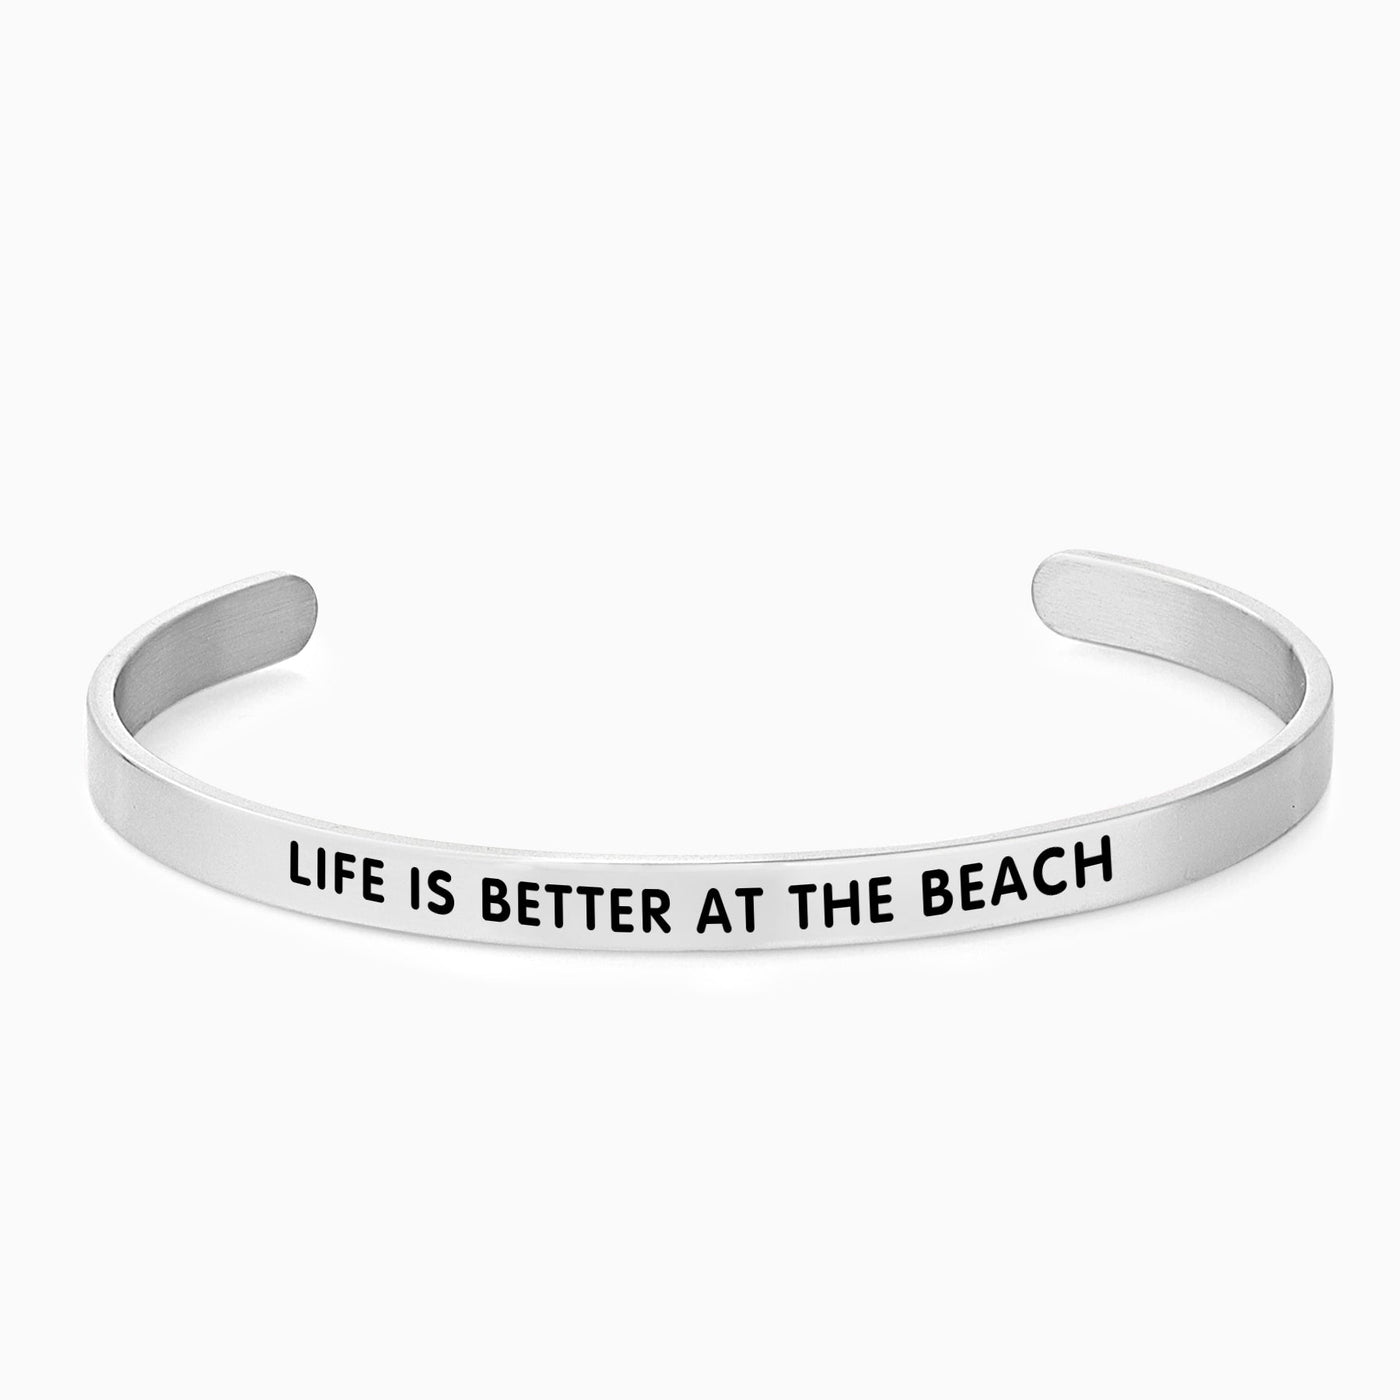 LIFE IS BETTER AT THE BEACH - OTANTO